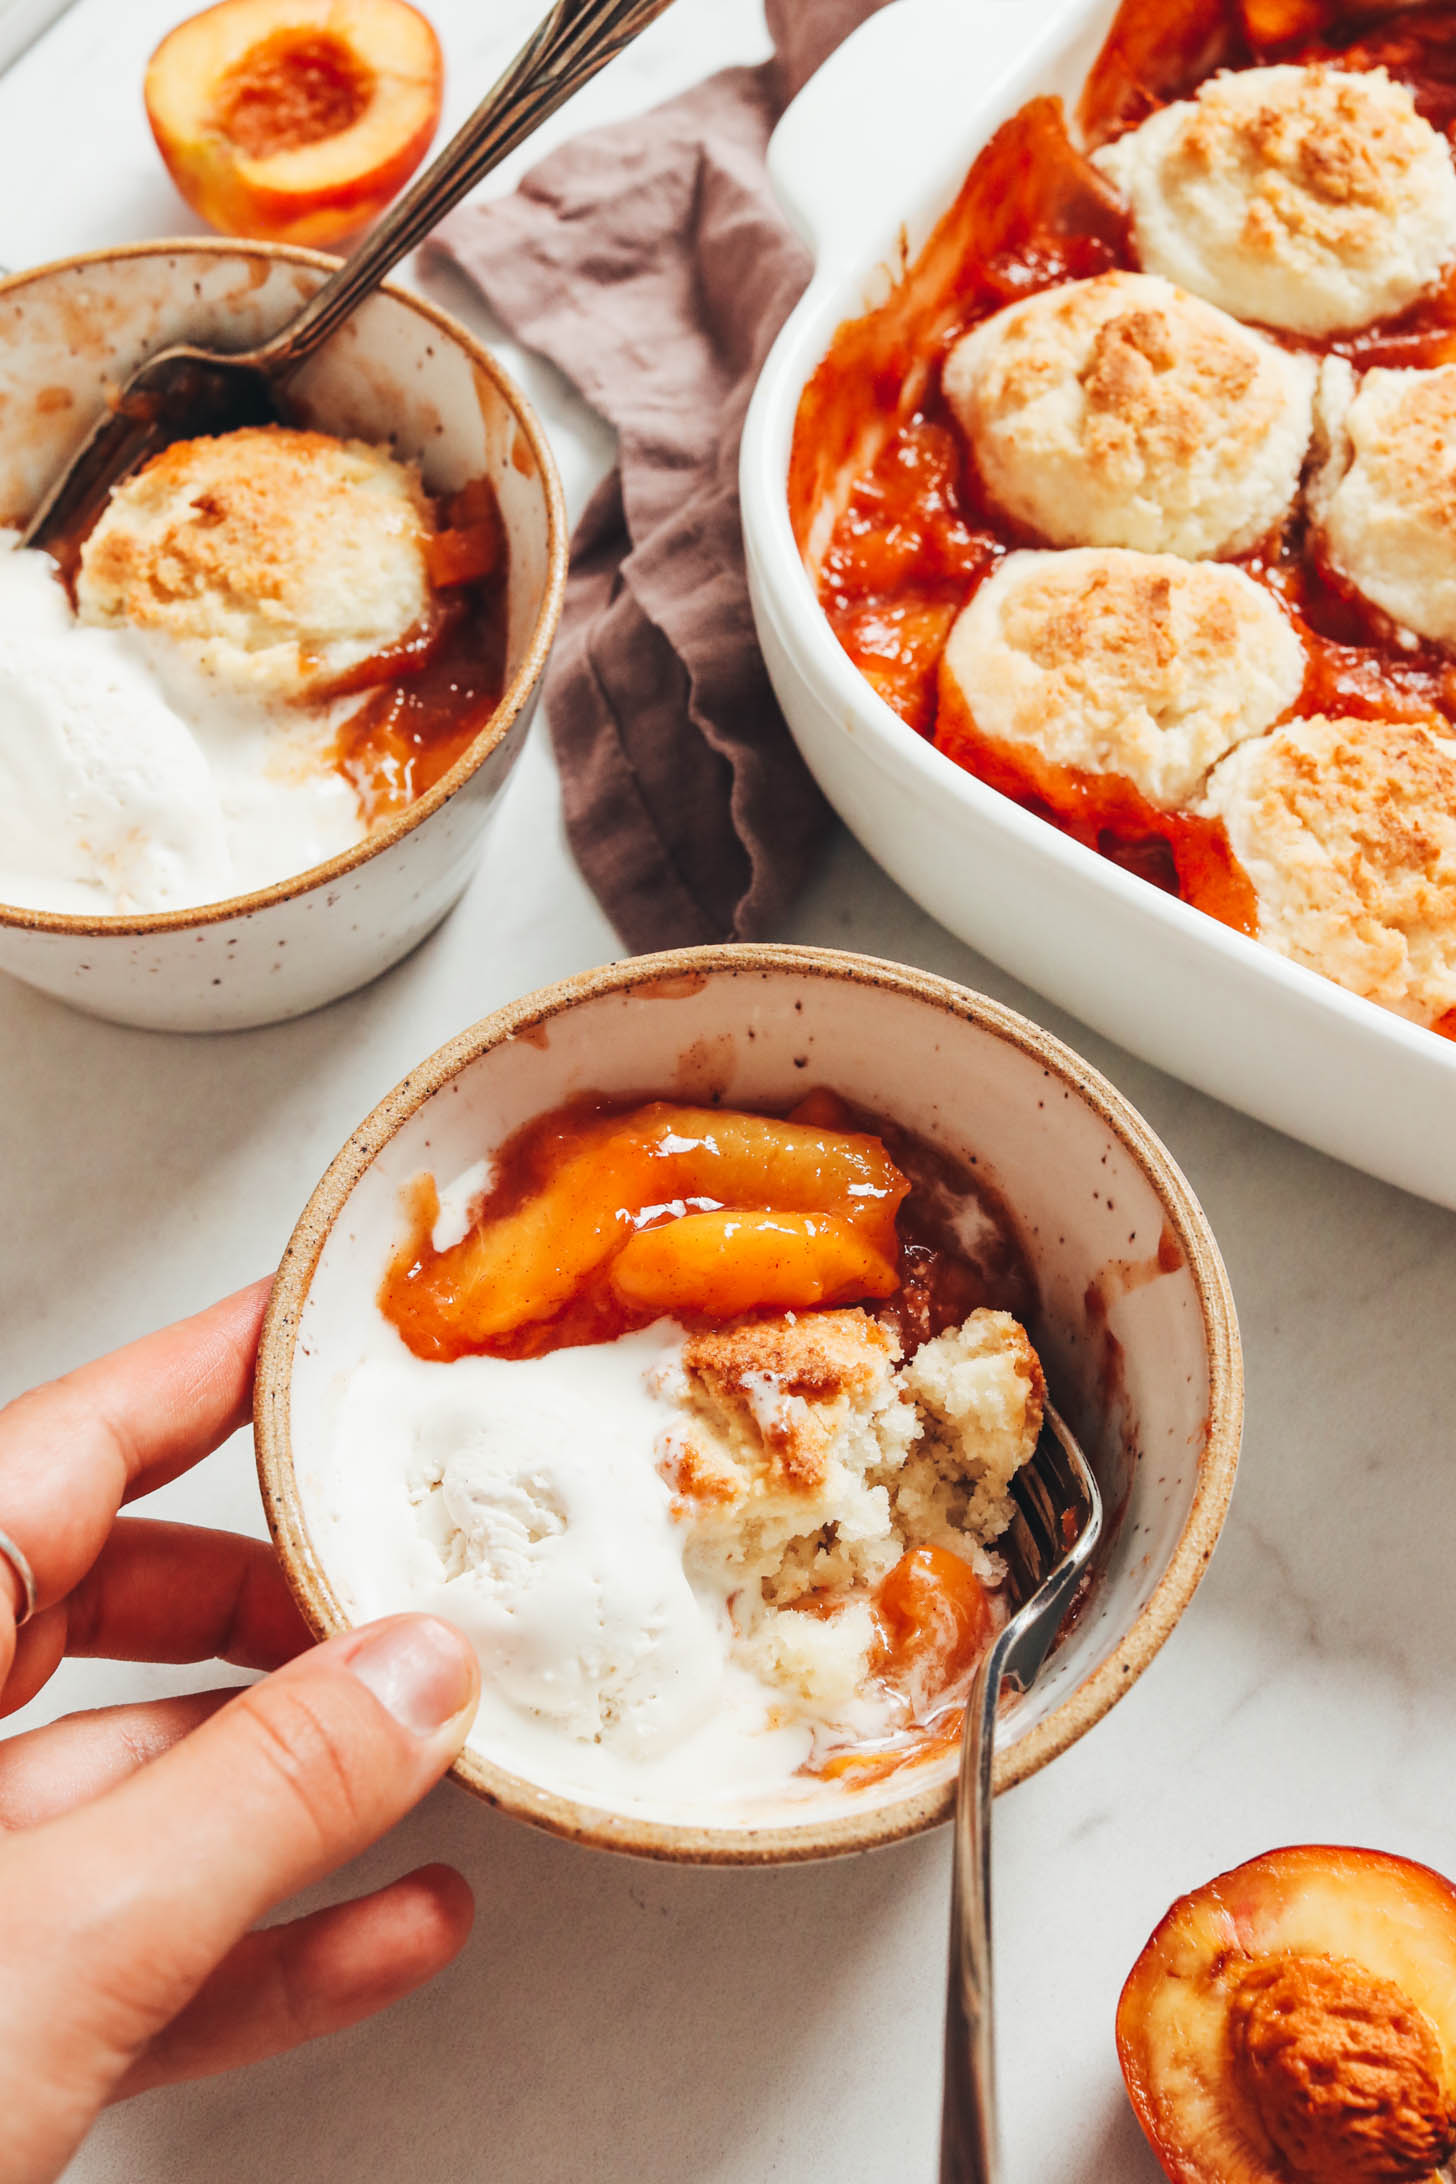 Bowls and baking dish filled with gluten-free vegan peach cobbler